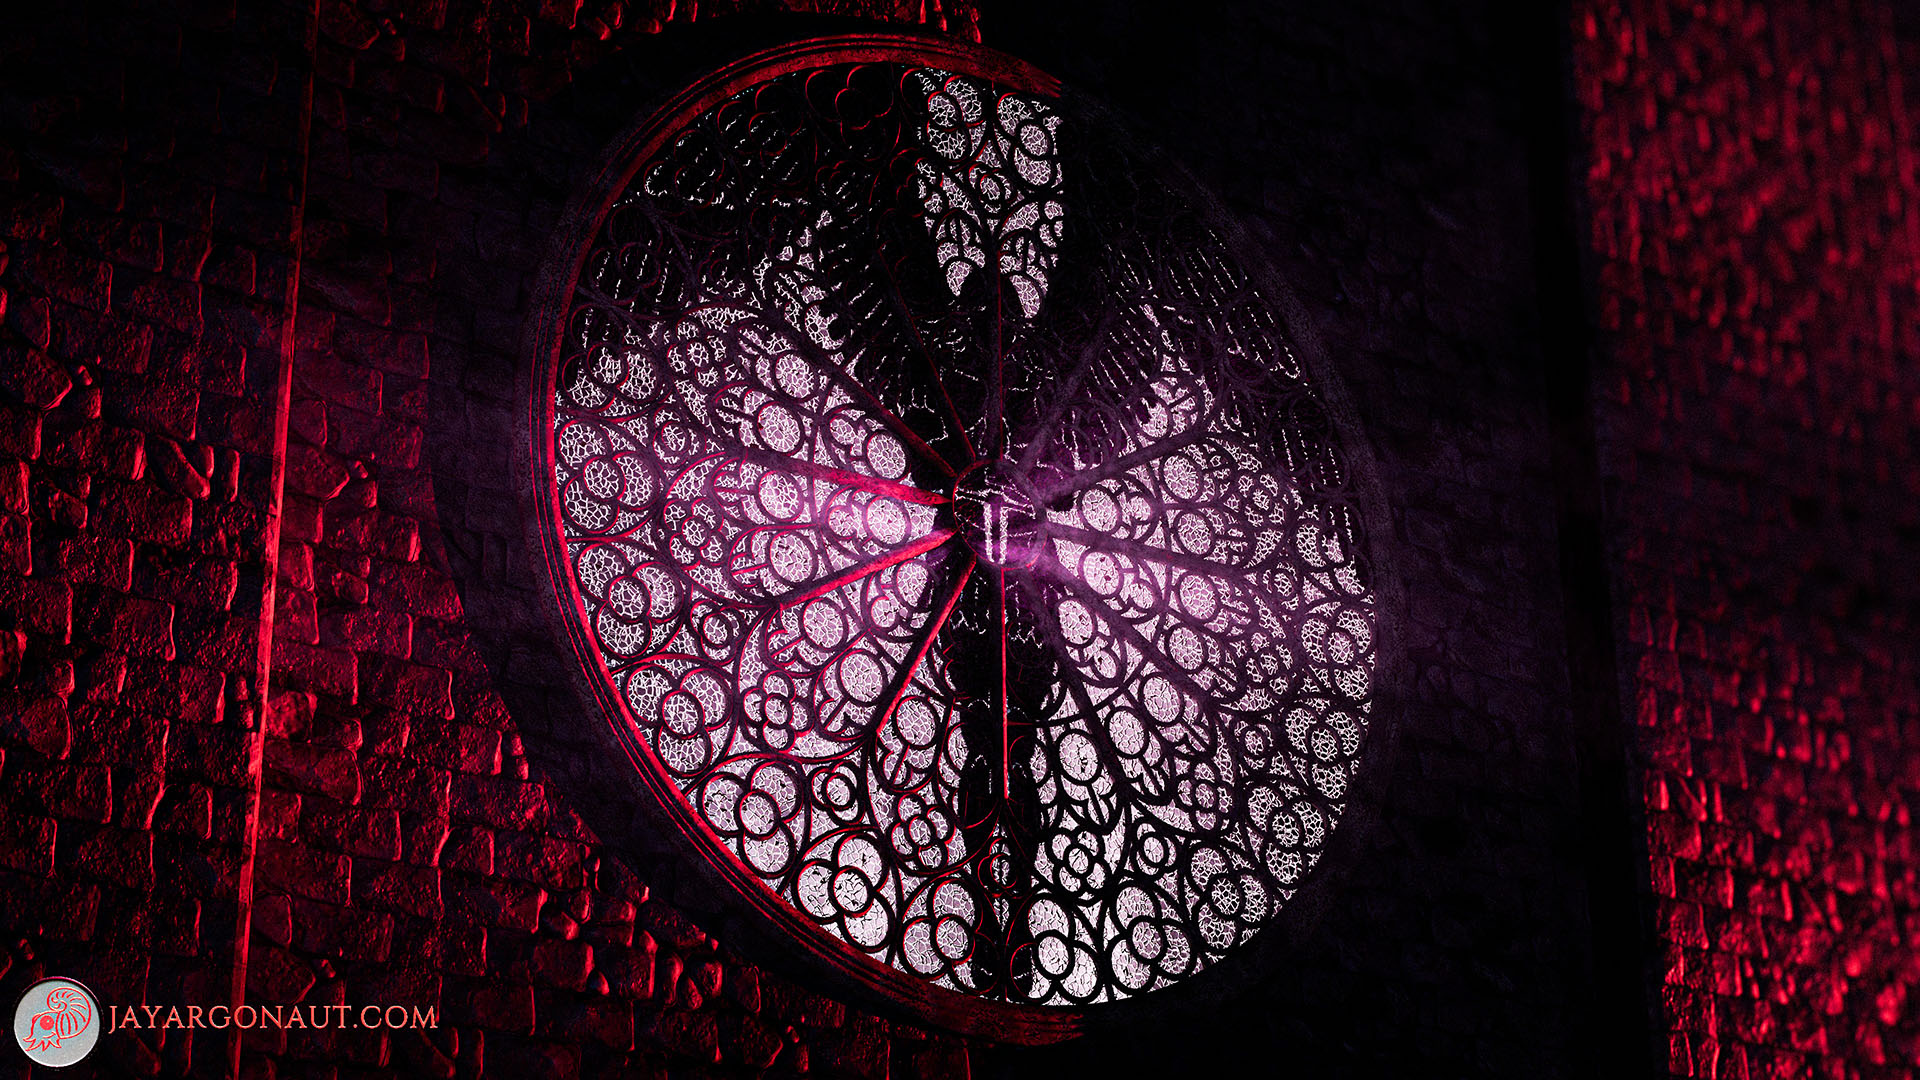 The Heaven and Hell Rose window by Jason Garth Edwards. Built, modelled, and rendered using Blender 4.0 creation suite.